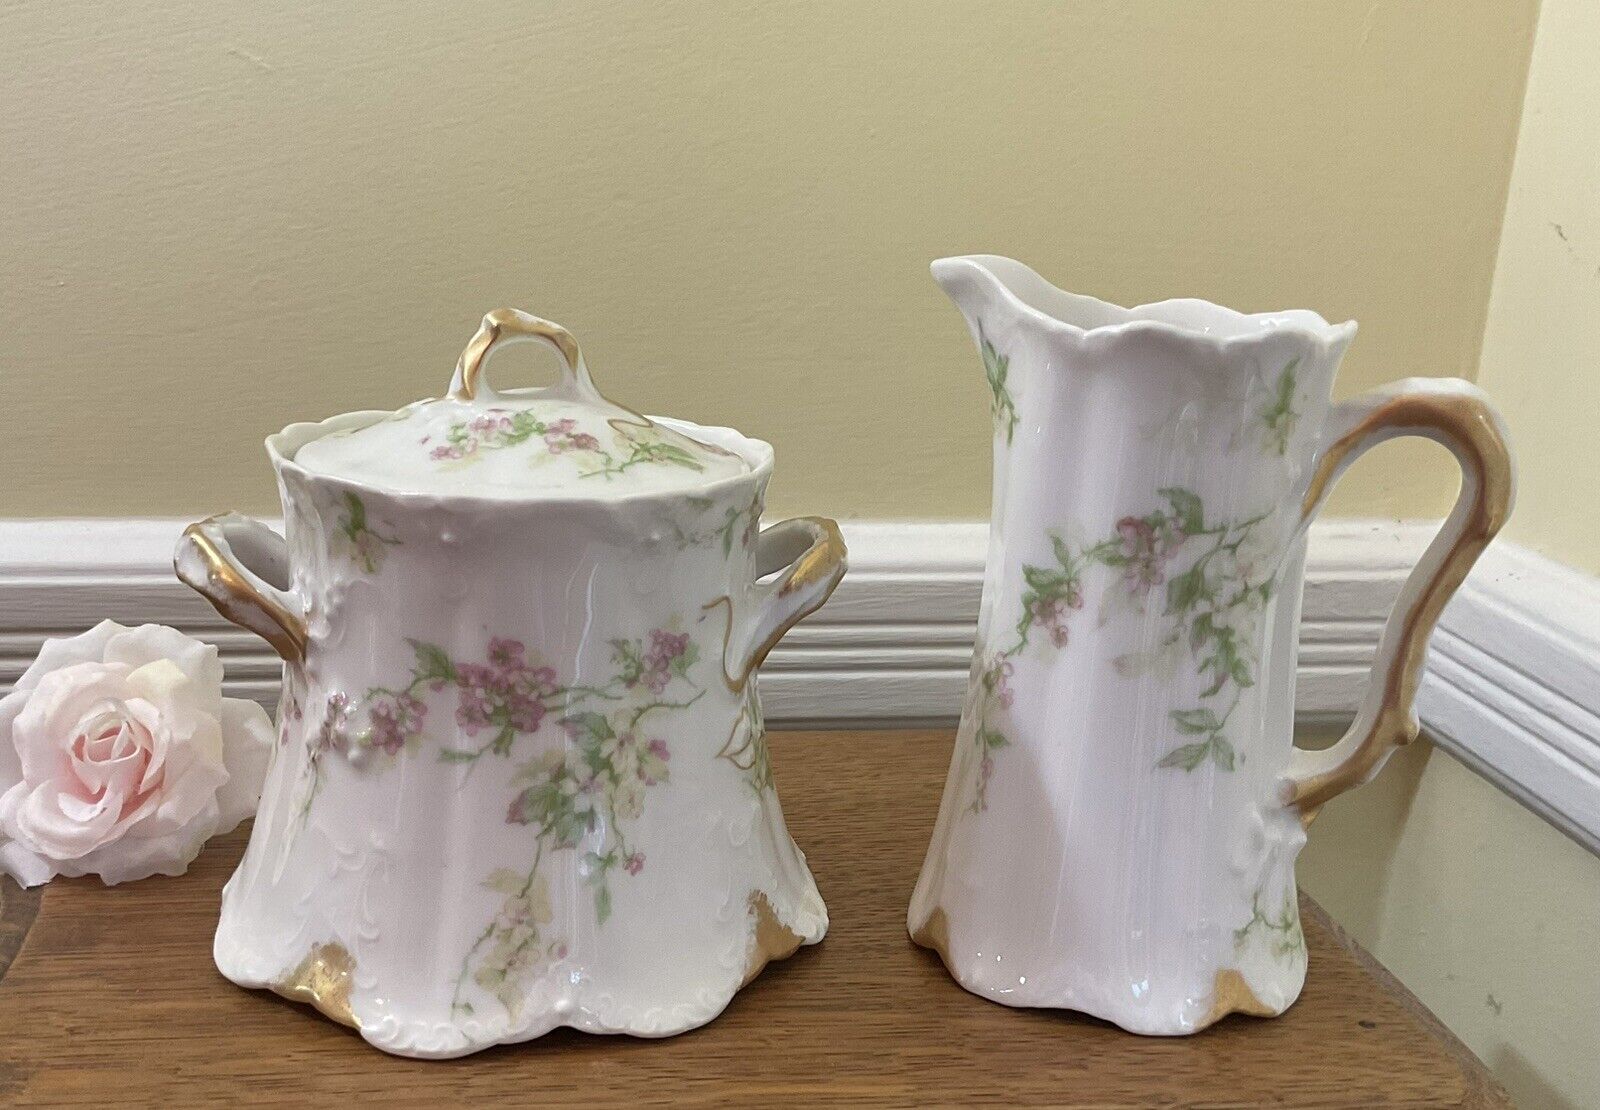 Antique c.1903 Theodore Haviland Sugar Bowl & Creamer with Pink Forget-Me-Nots